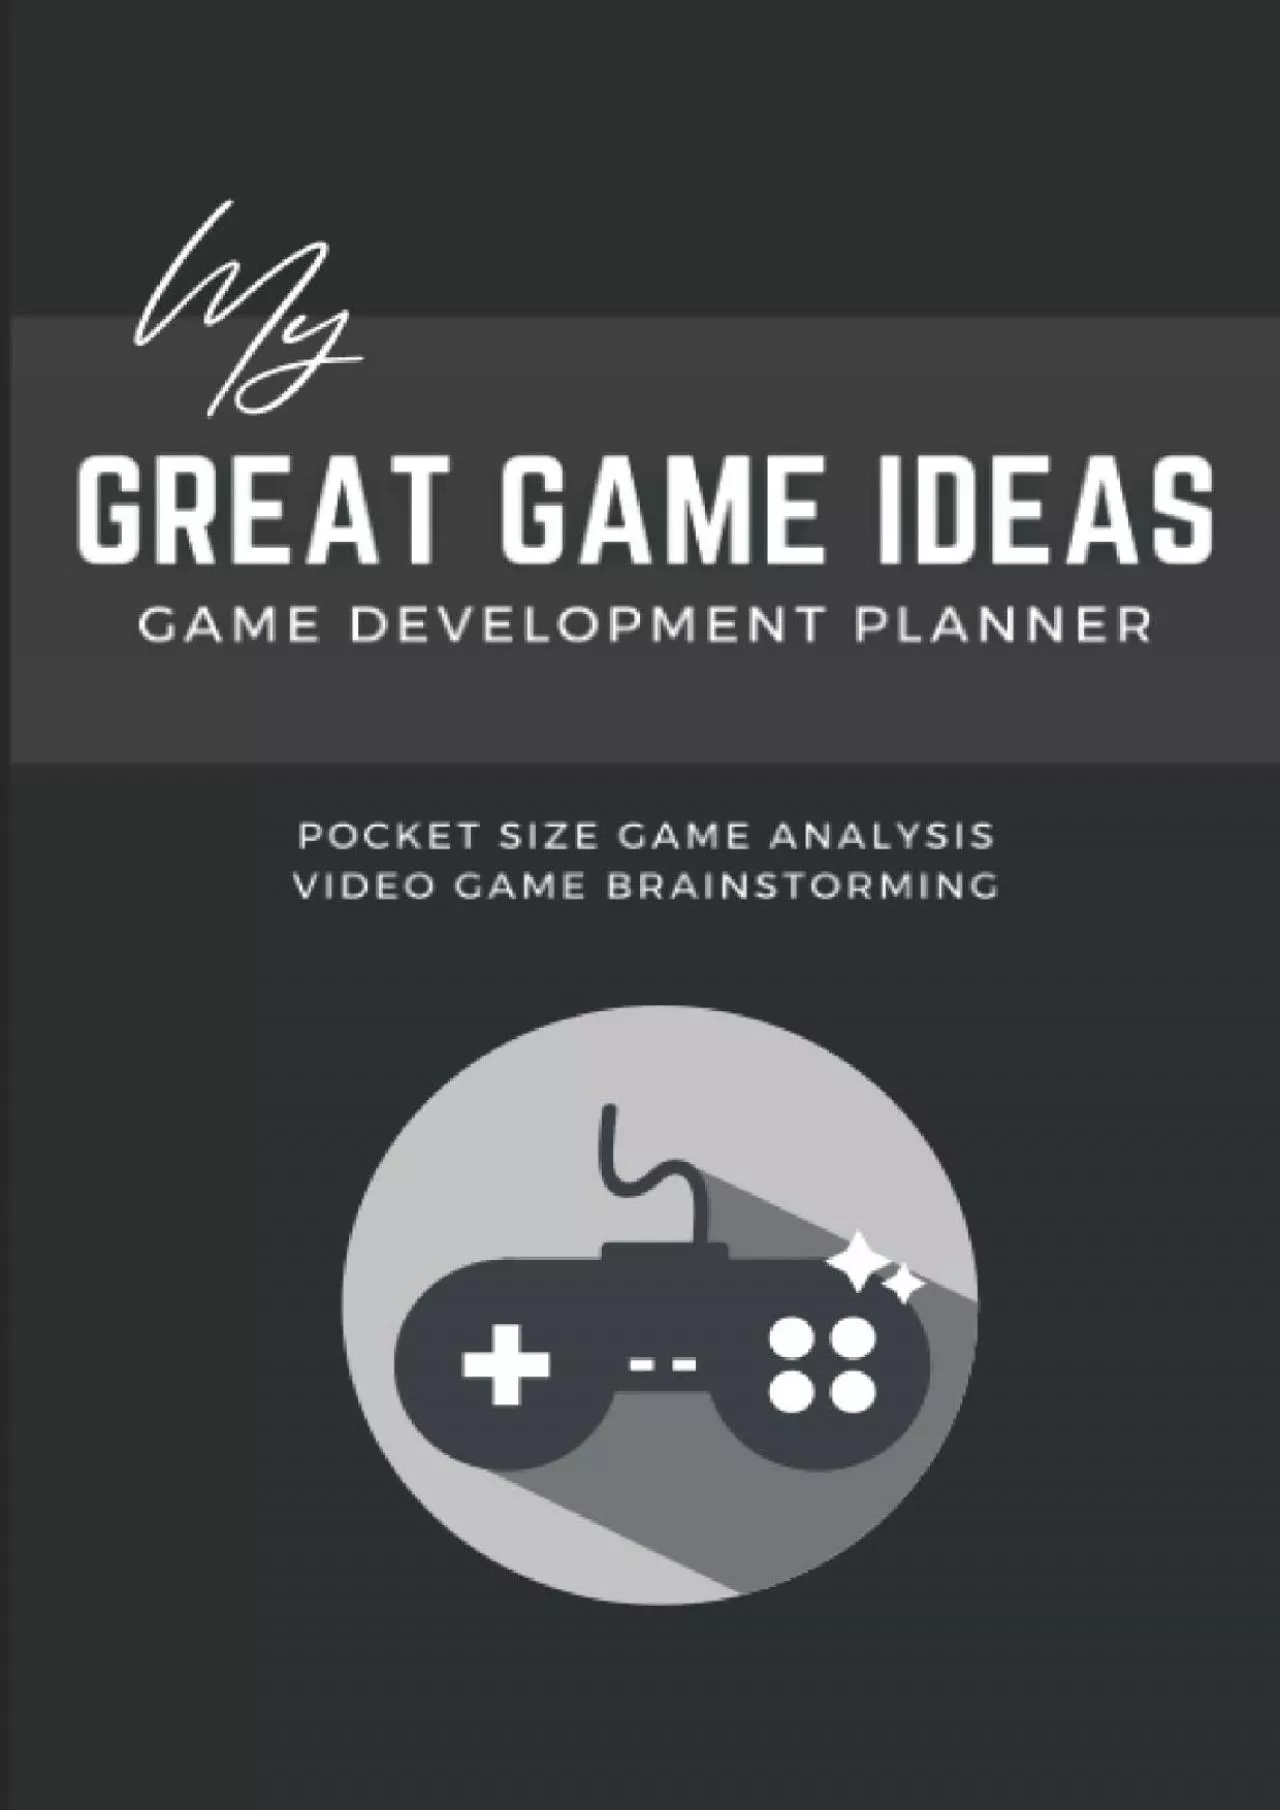 [DOWLOAD]-Game Development Planner: My Great Game Ideas - Video Game Design Book - For